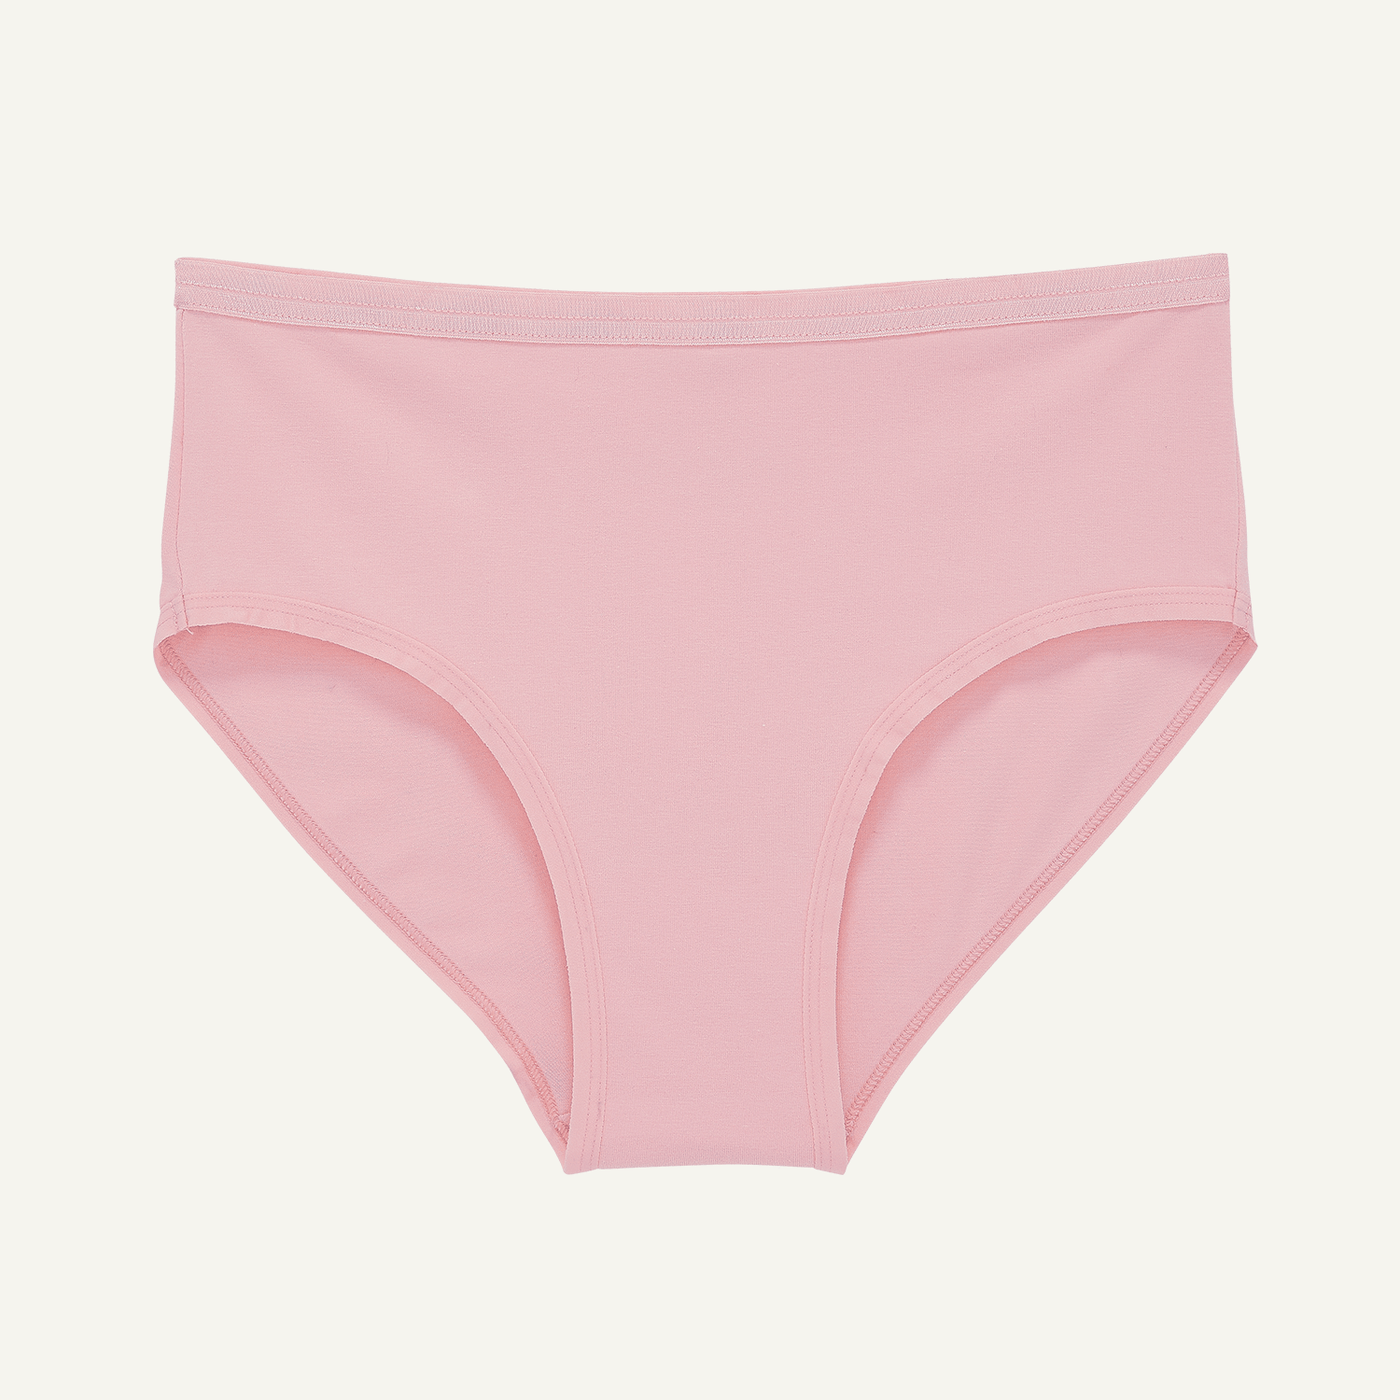 SALE Mid-Rise Brief in Rosy Cheeks